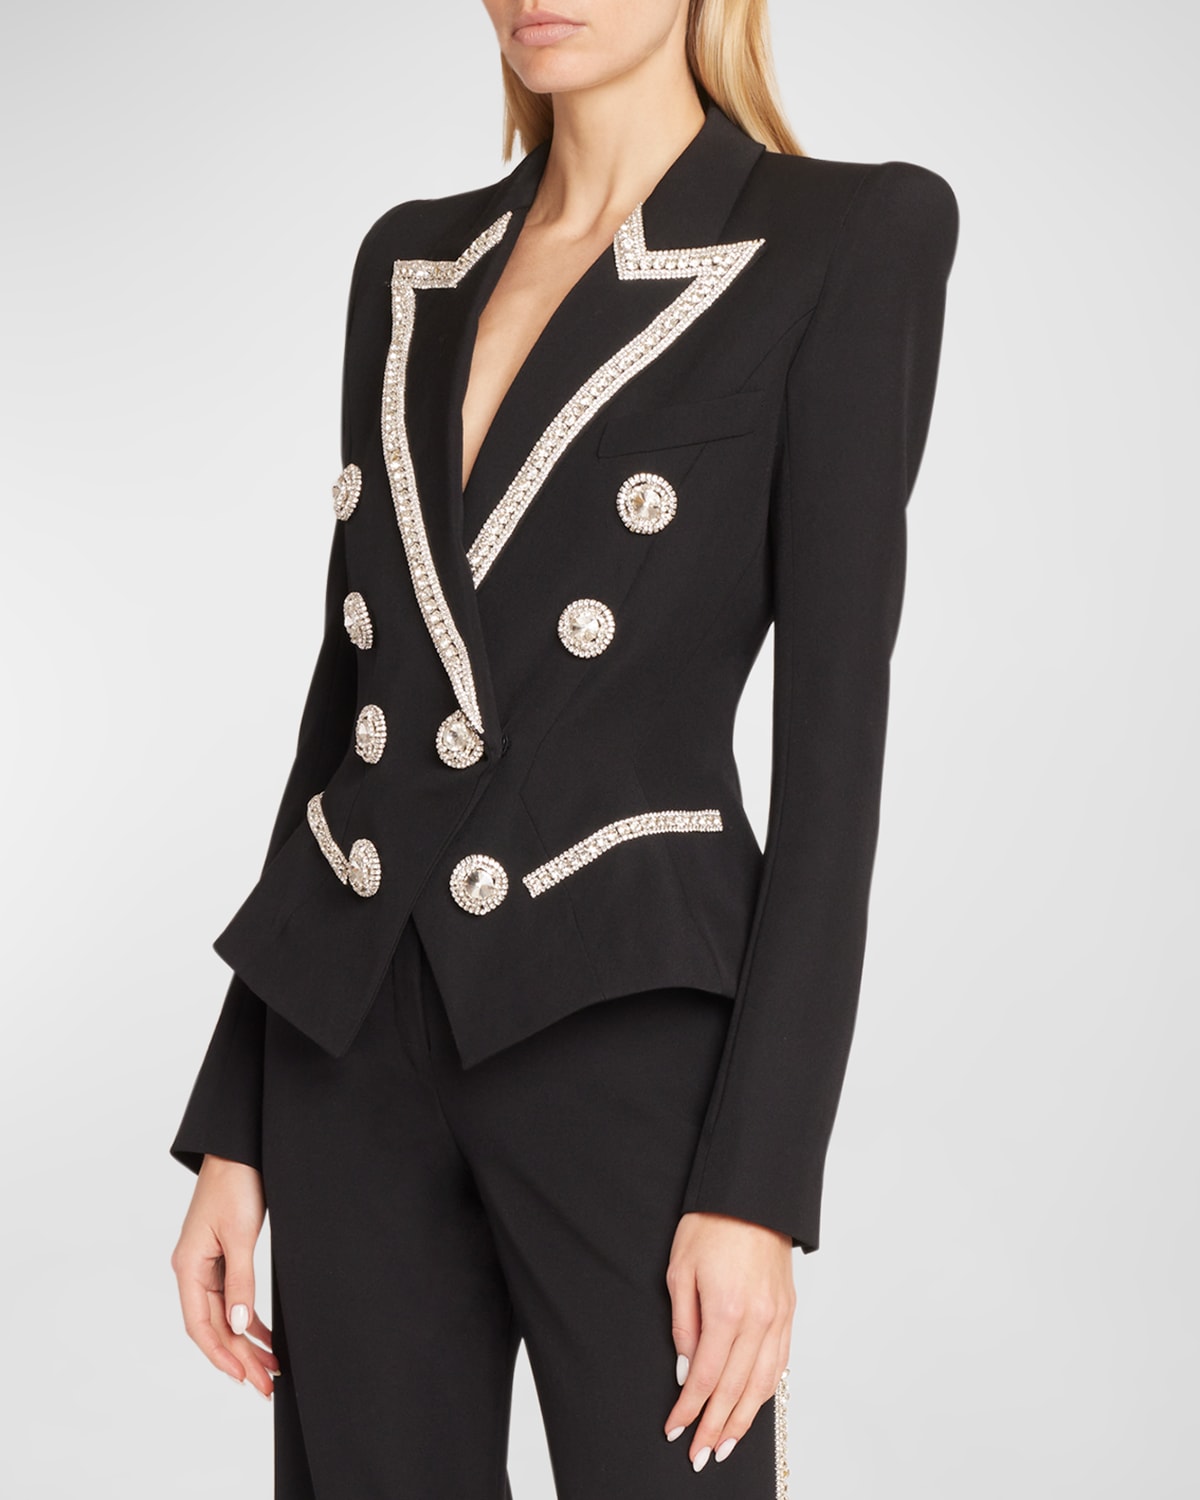 BALMAIN EMBROIDERED 8-BUTTON DOUBLE-BREASTED JACKET